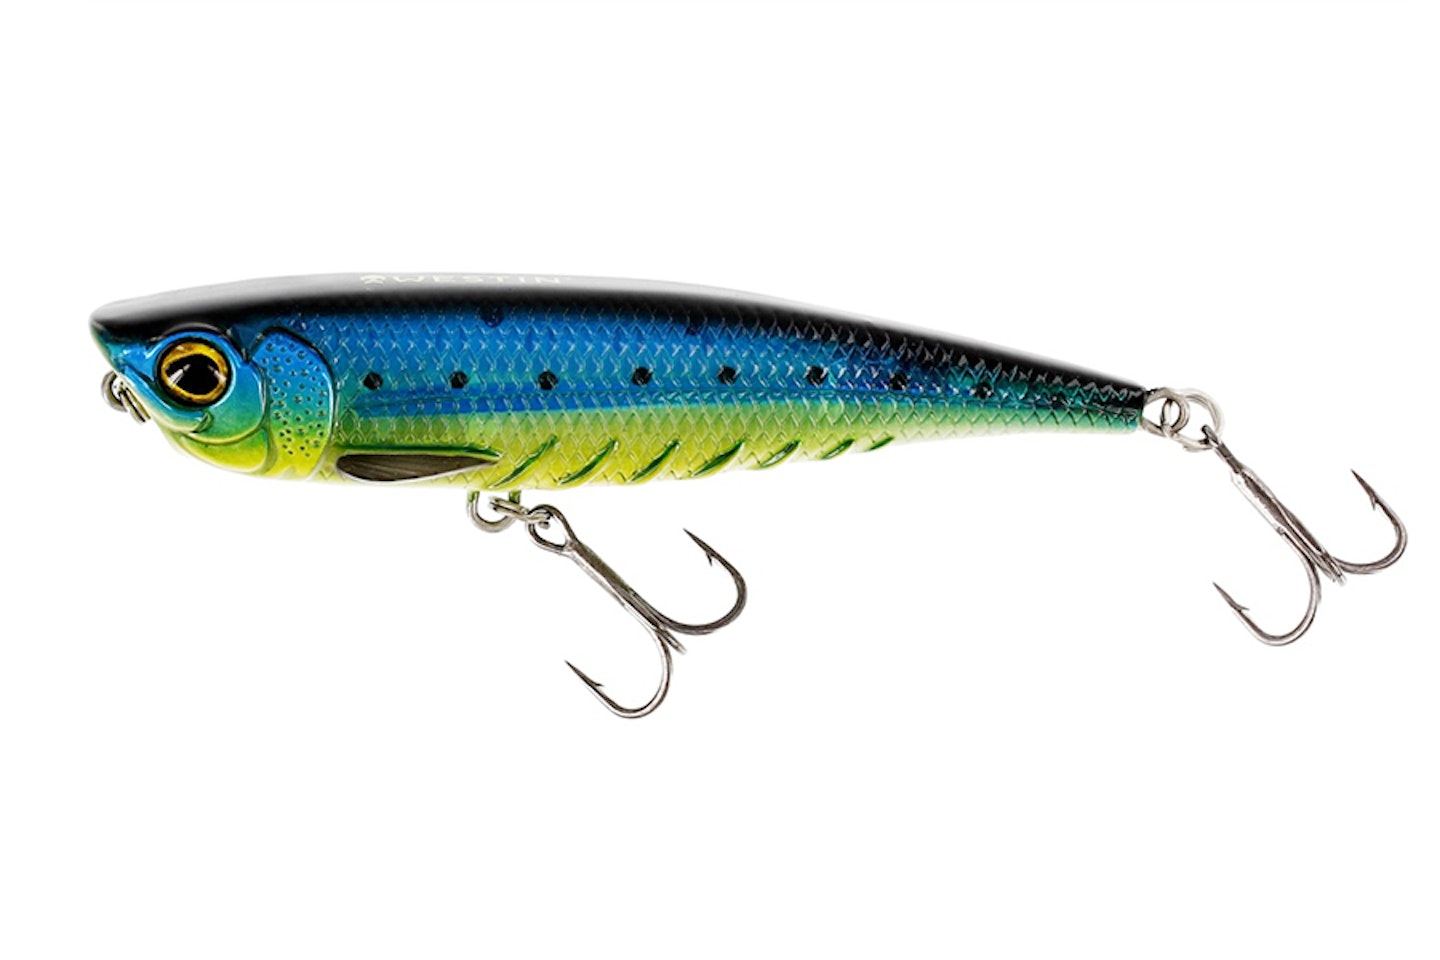 The best bass lures for shore fishing